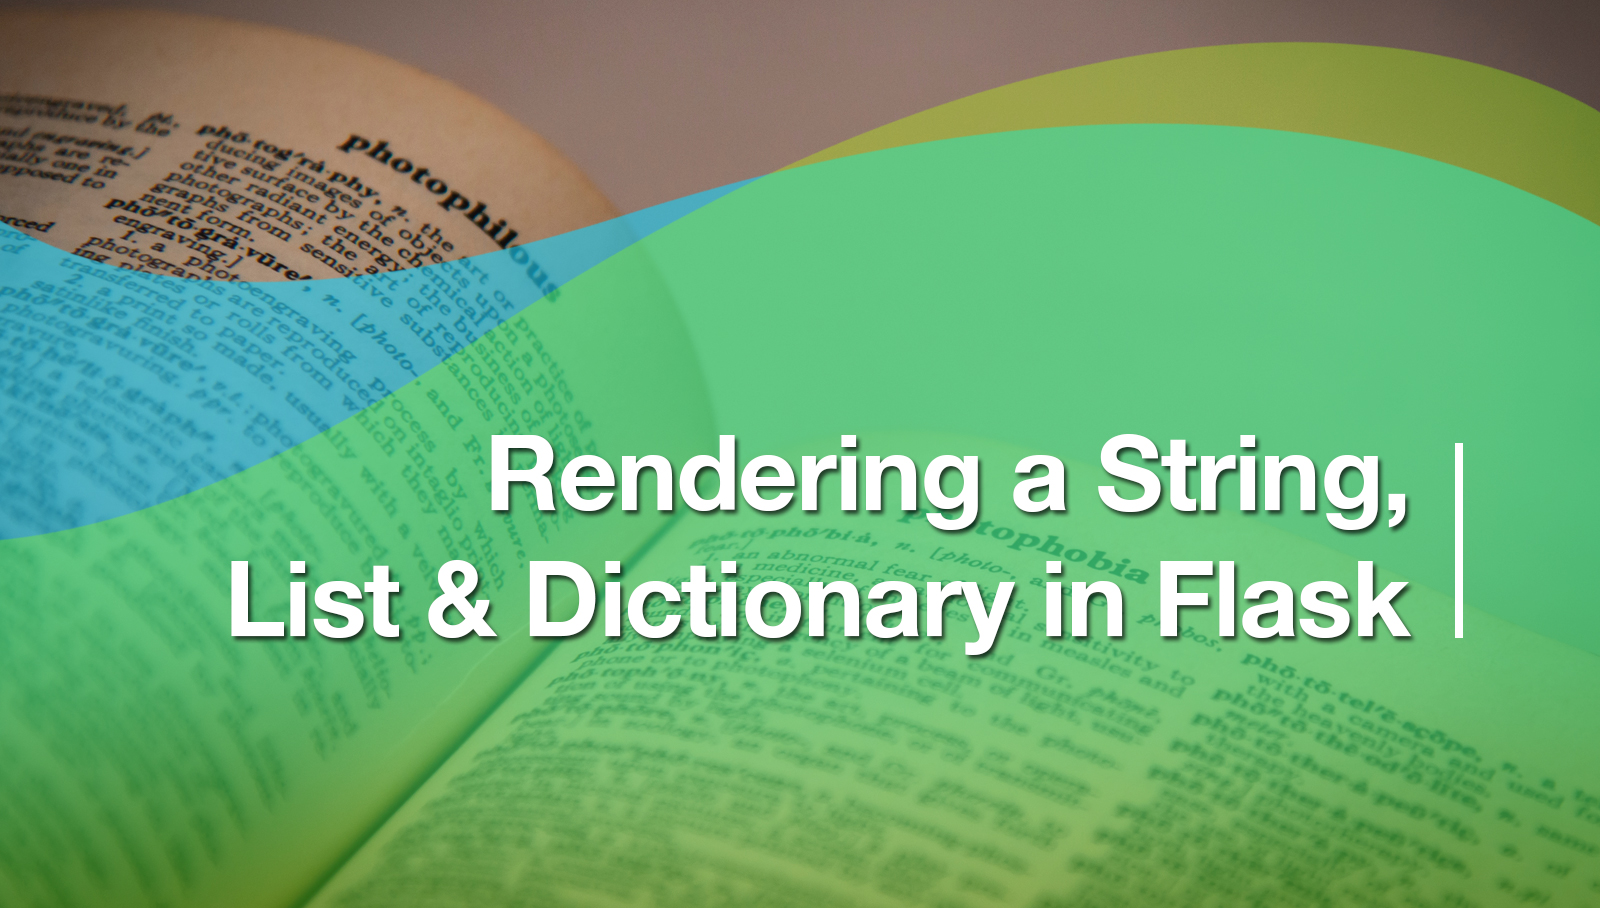 Rendering a String, List & Dictionary in Flask